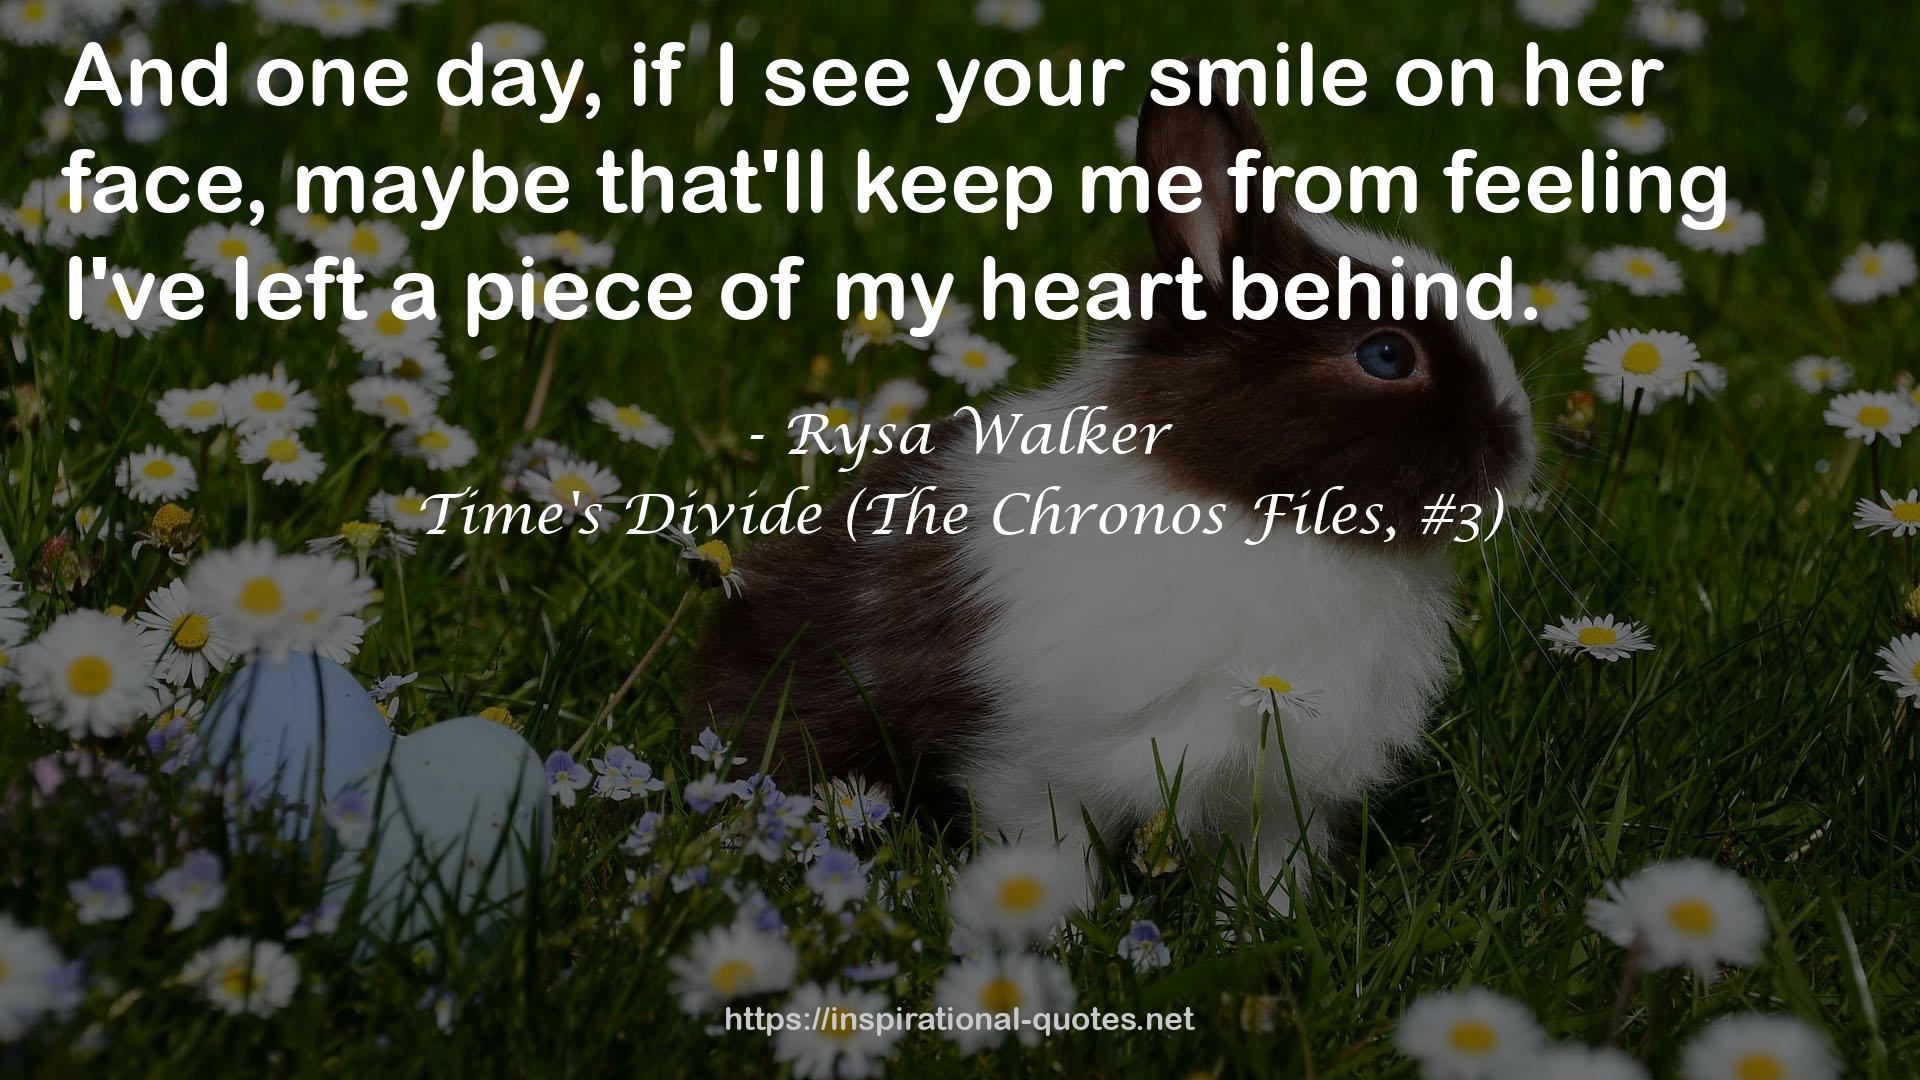 Time's Divide (The Chronos Files, #3) QUOTES